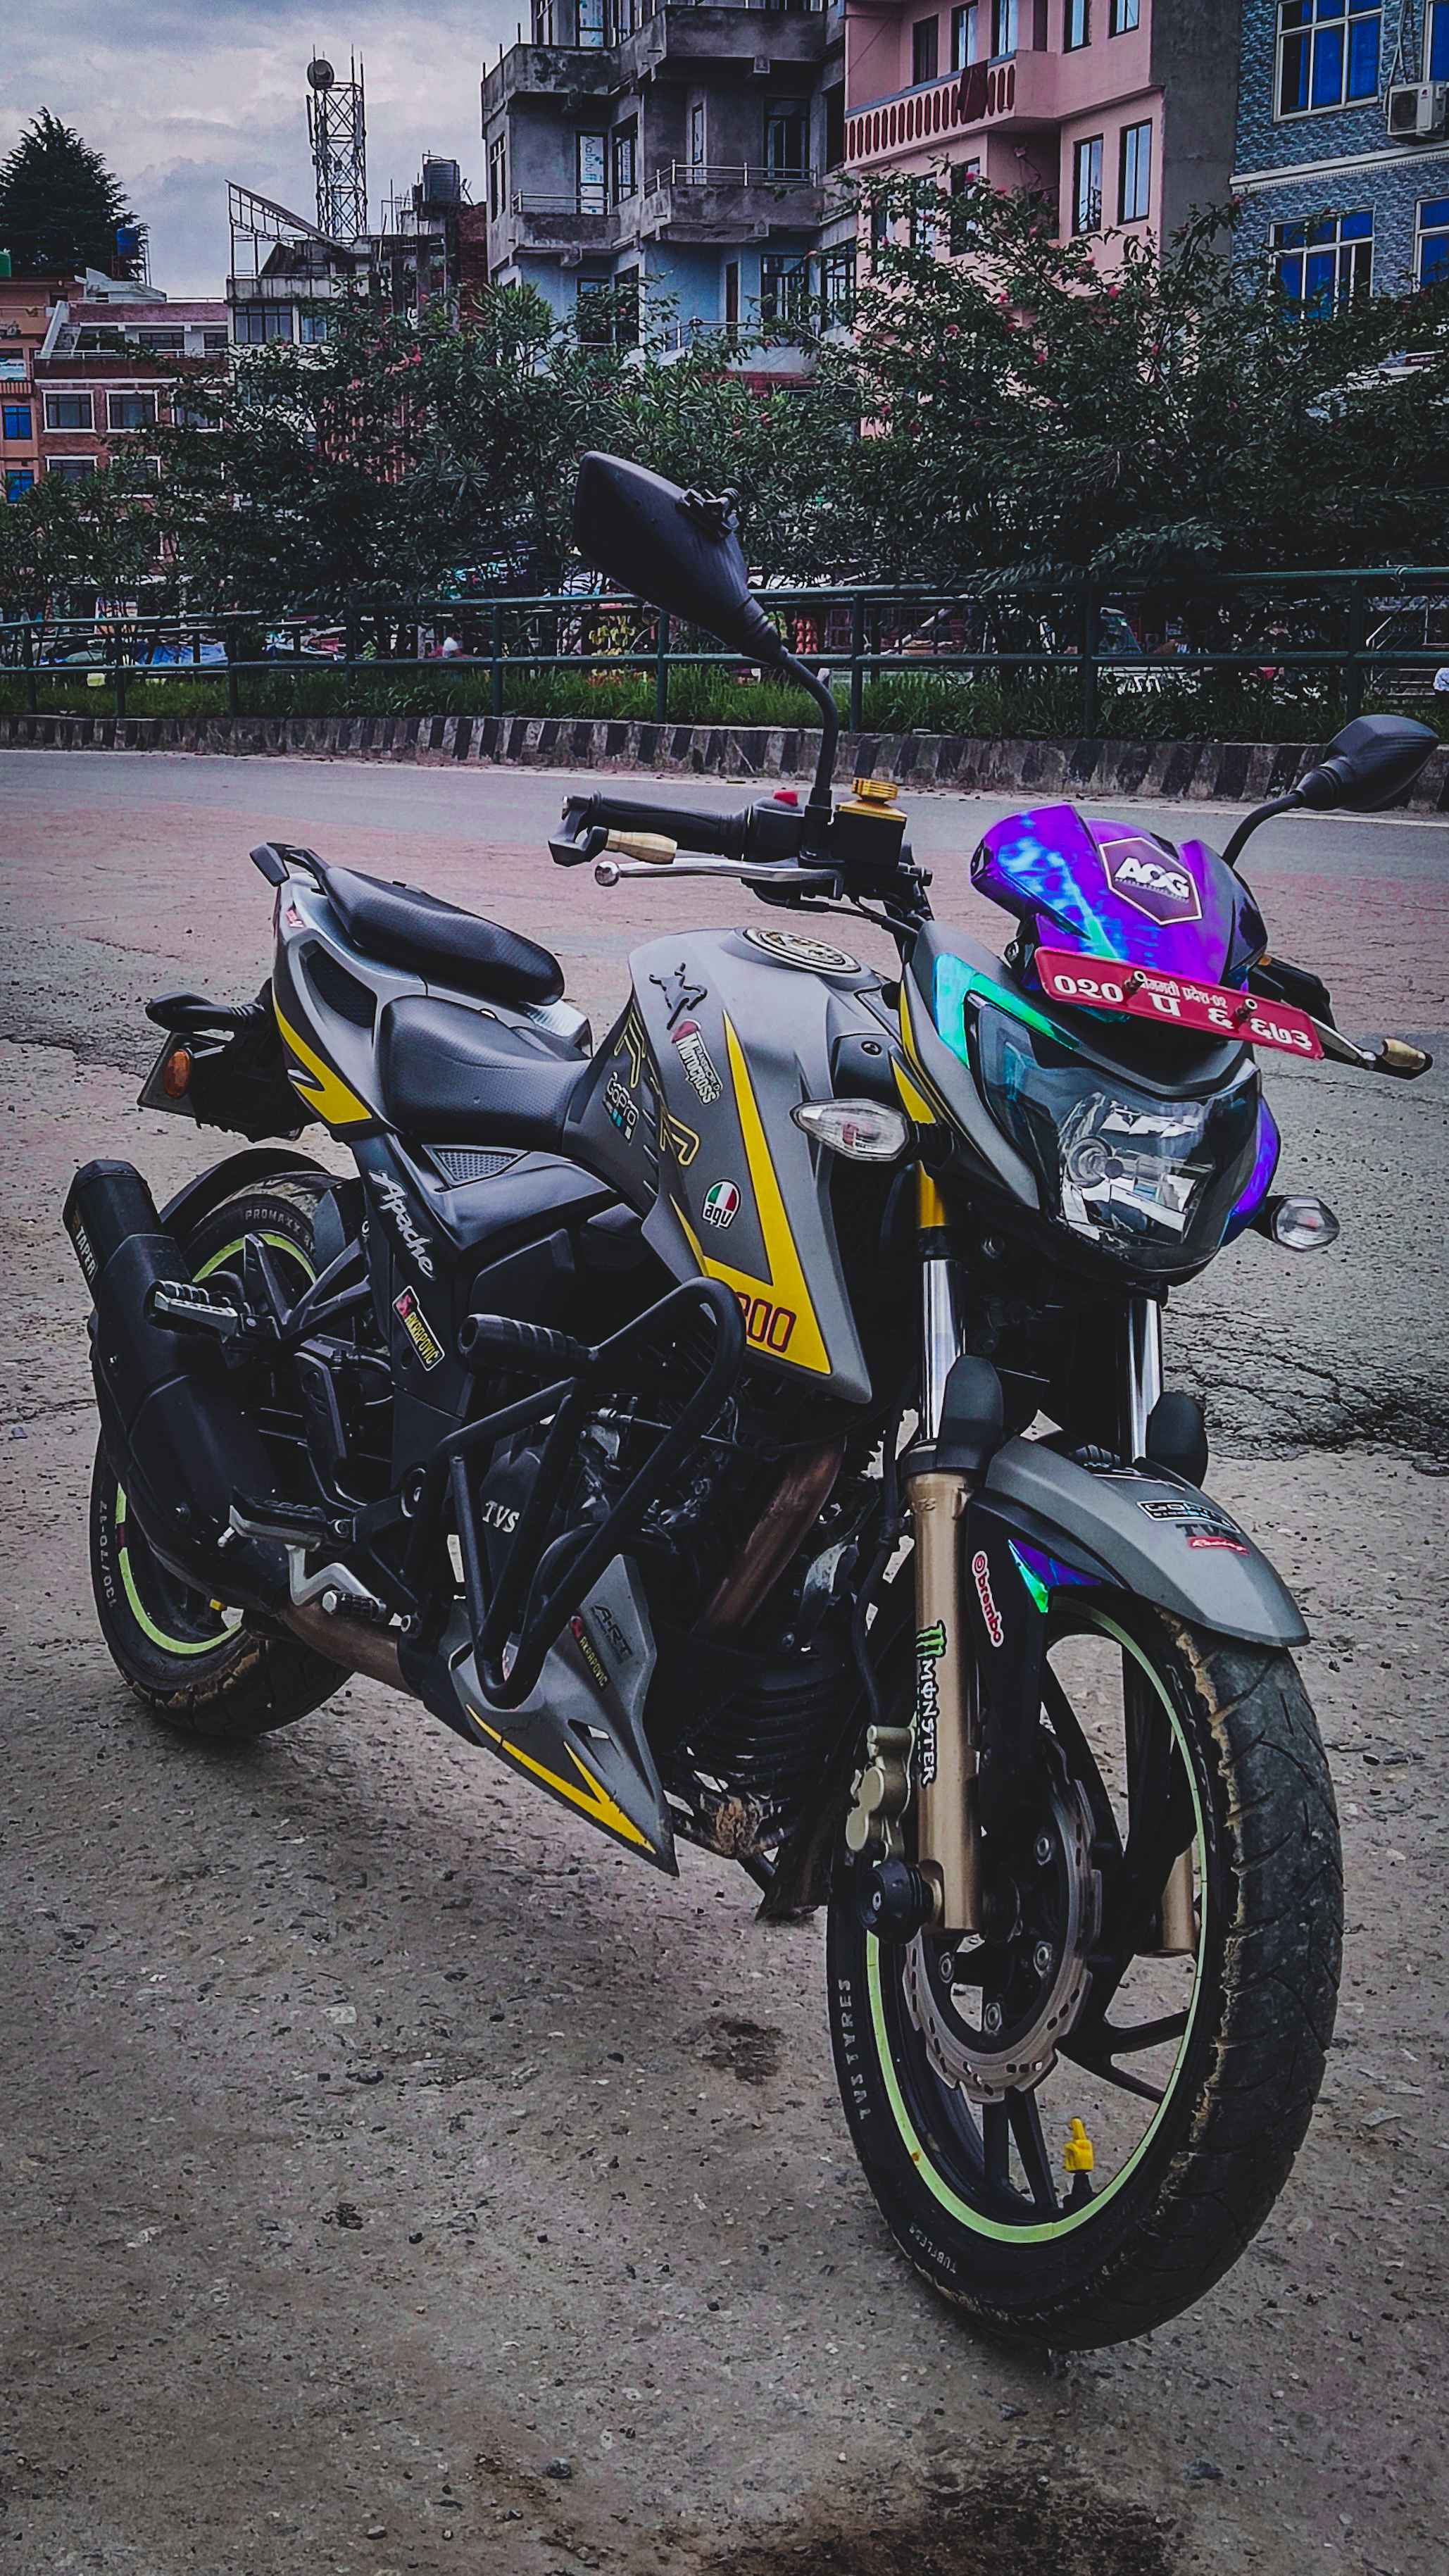 RTR 200 for sale